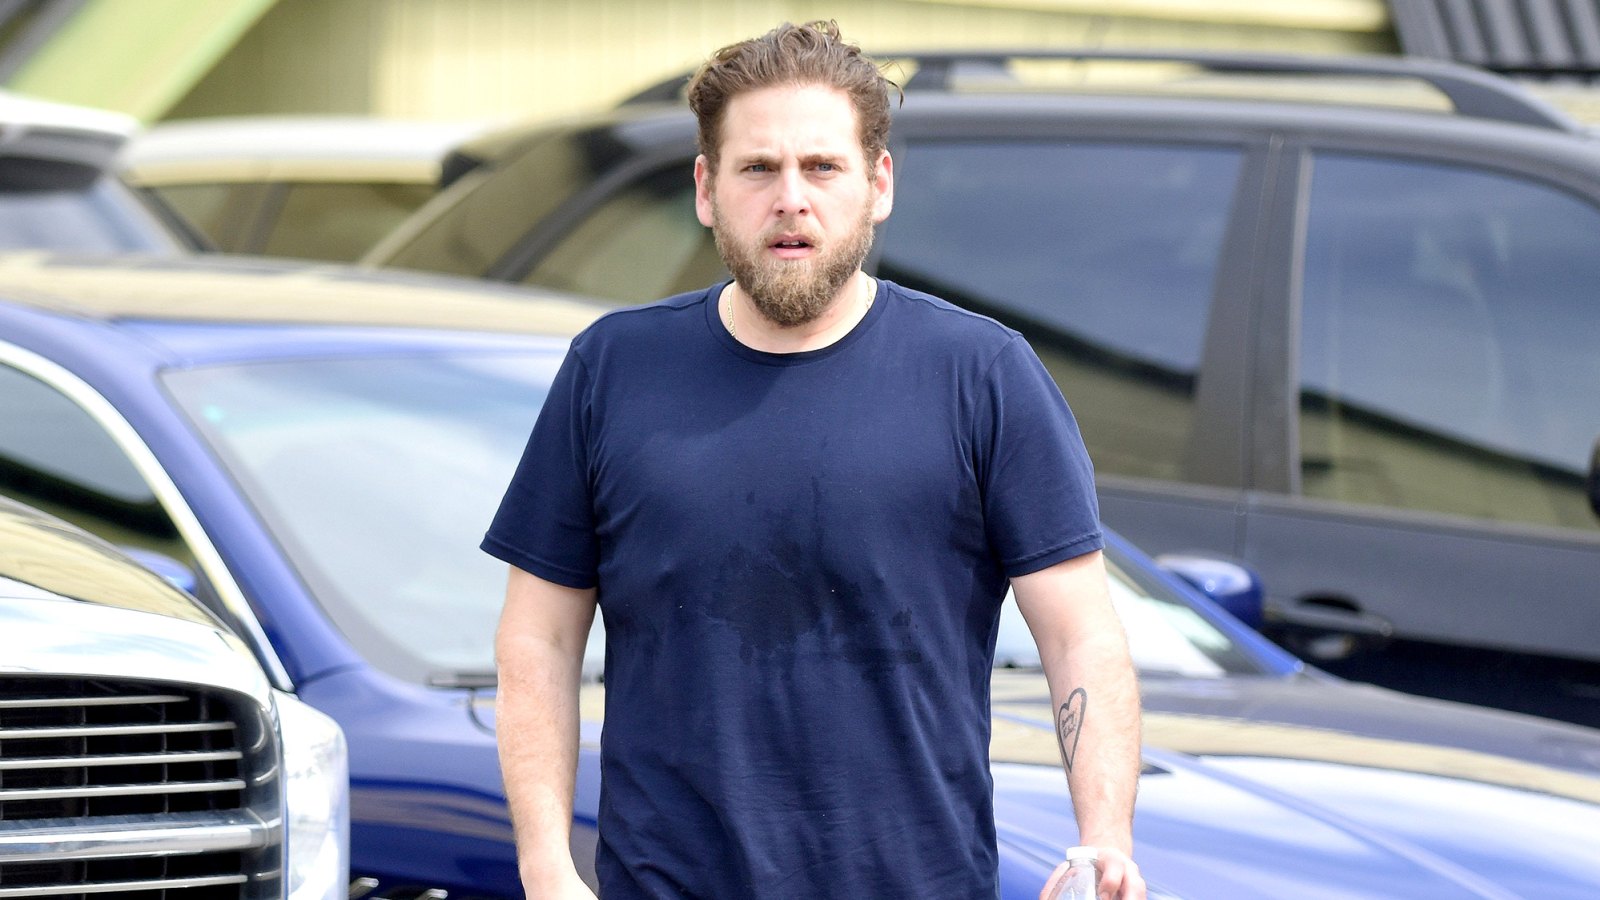 Jonah Hill leaves the gym in Los Angeles on March 11.